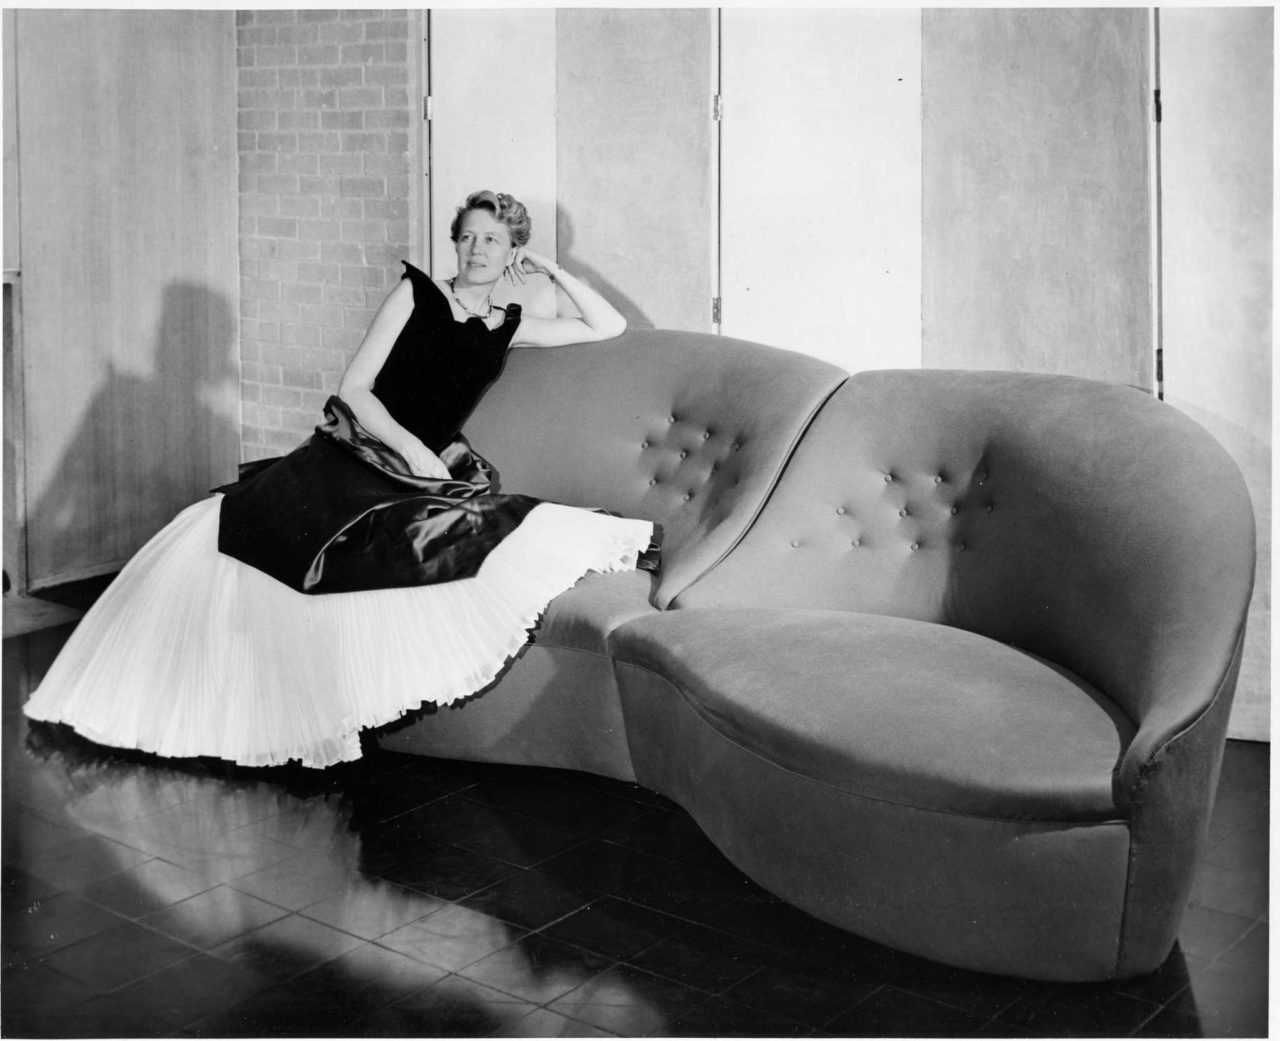 Dominique de Menil in a Charles James gown seated on a sofa of his design